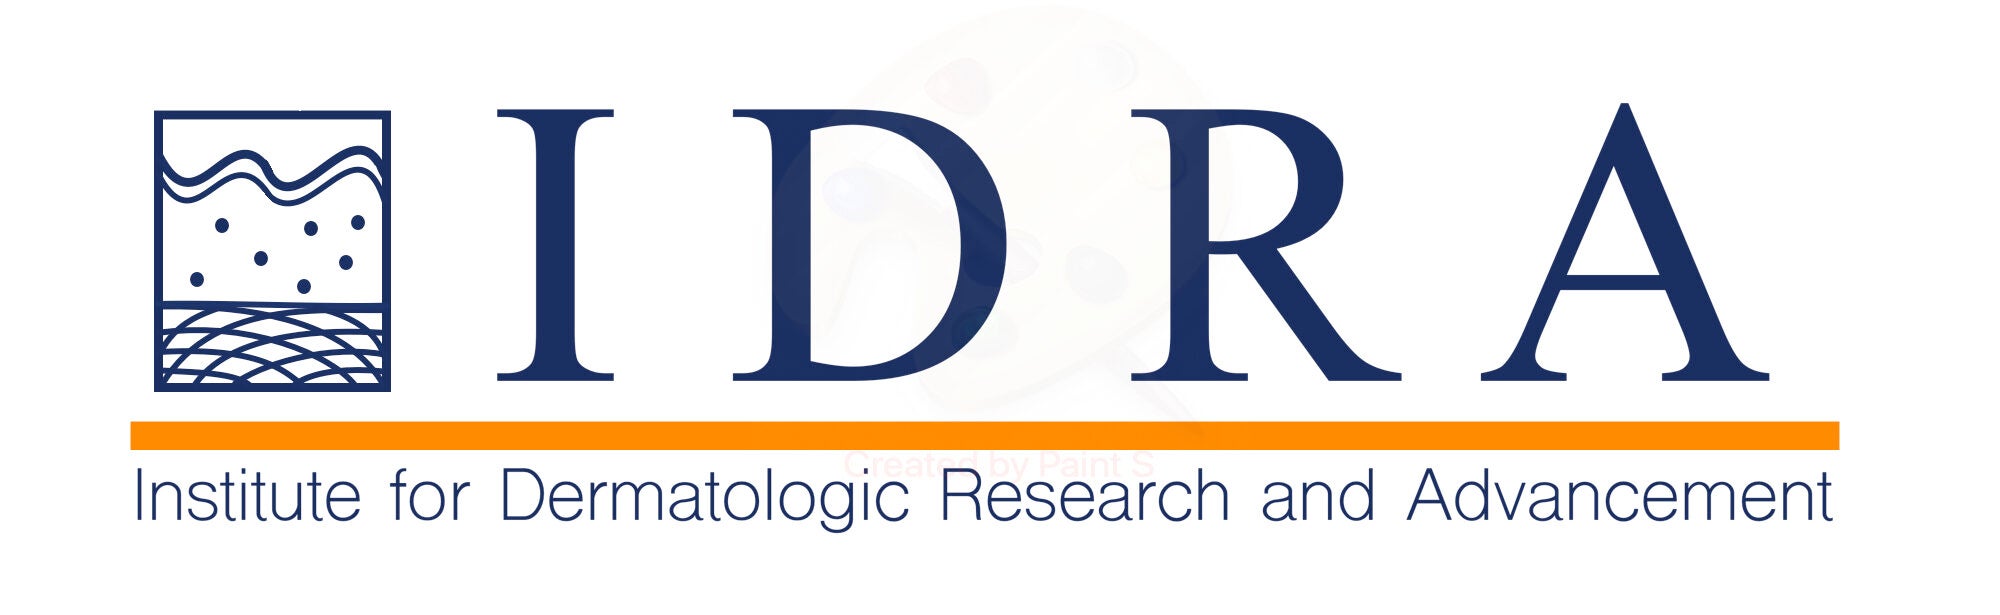 Institute for Dermatologic Research and Advancement